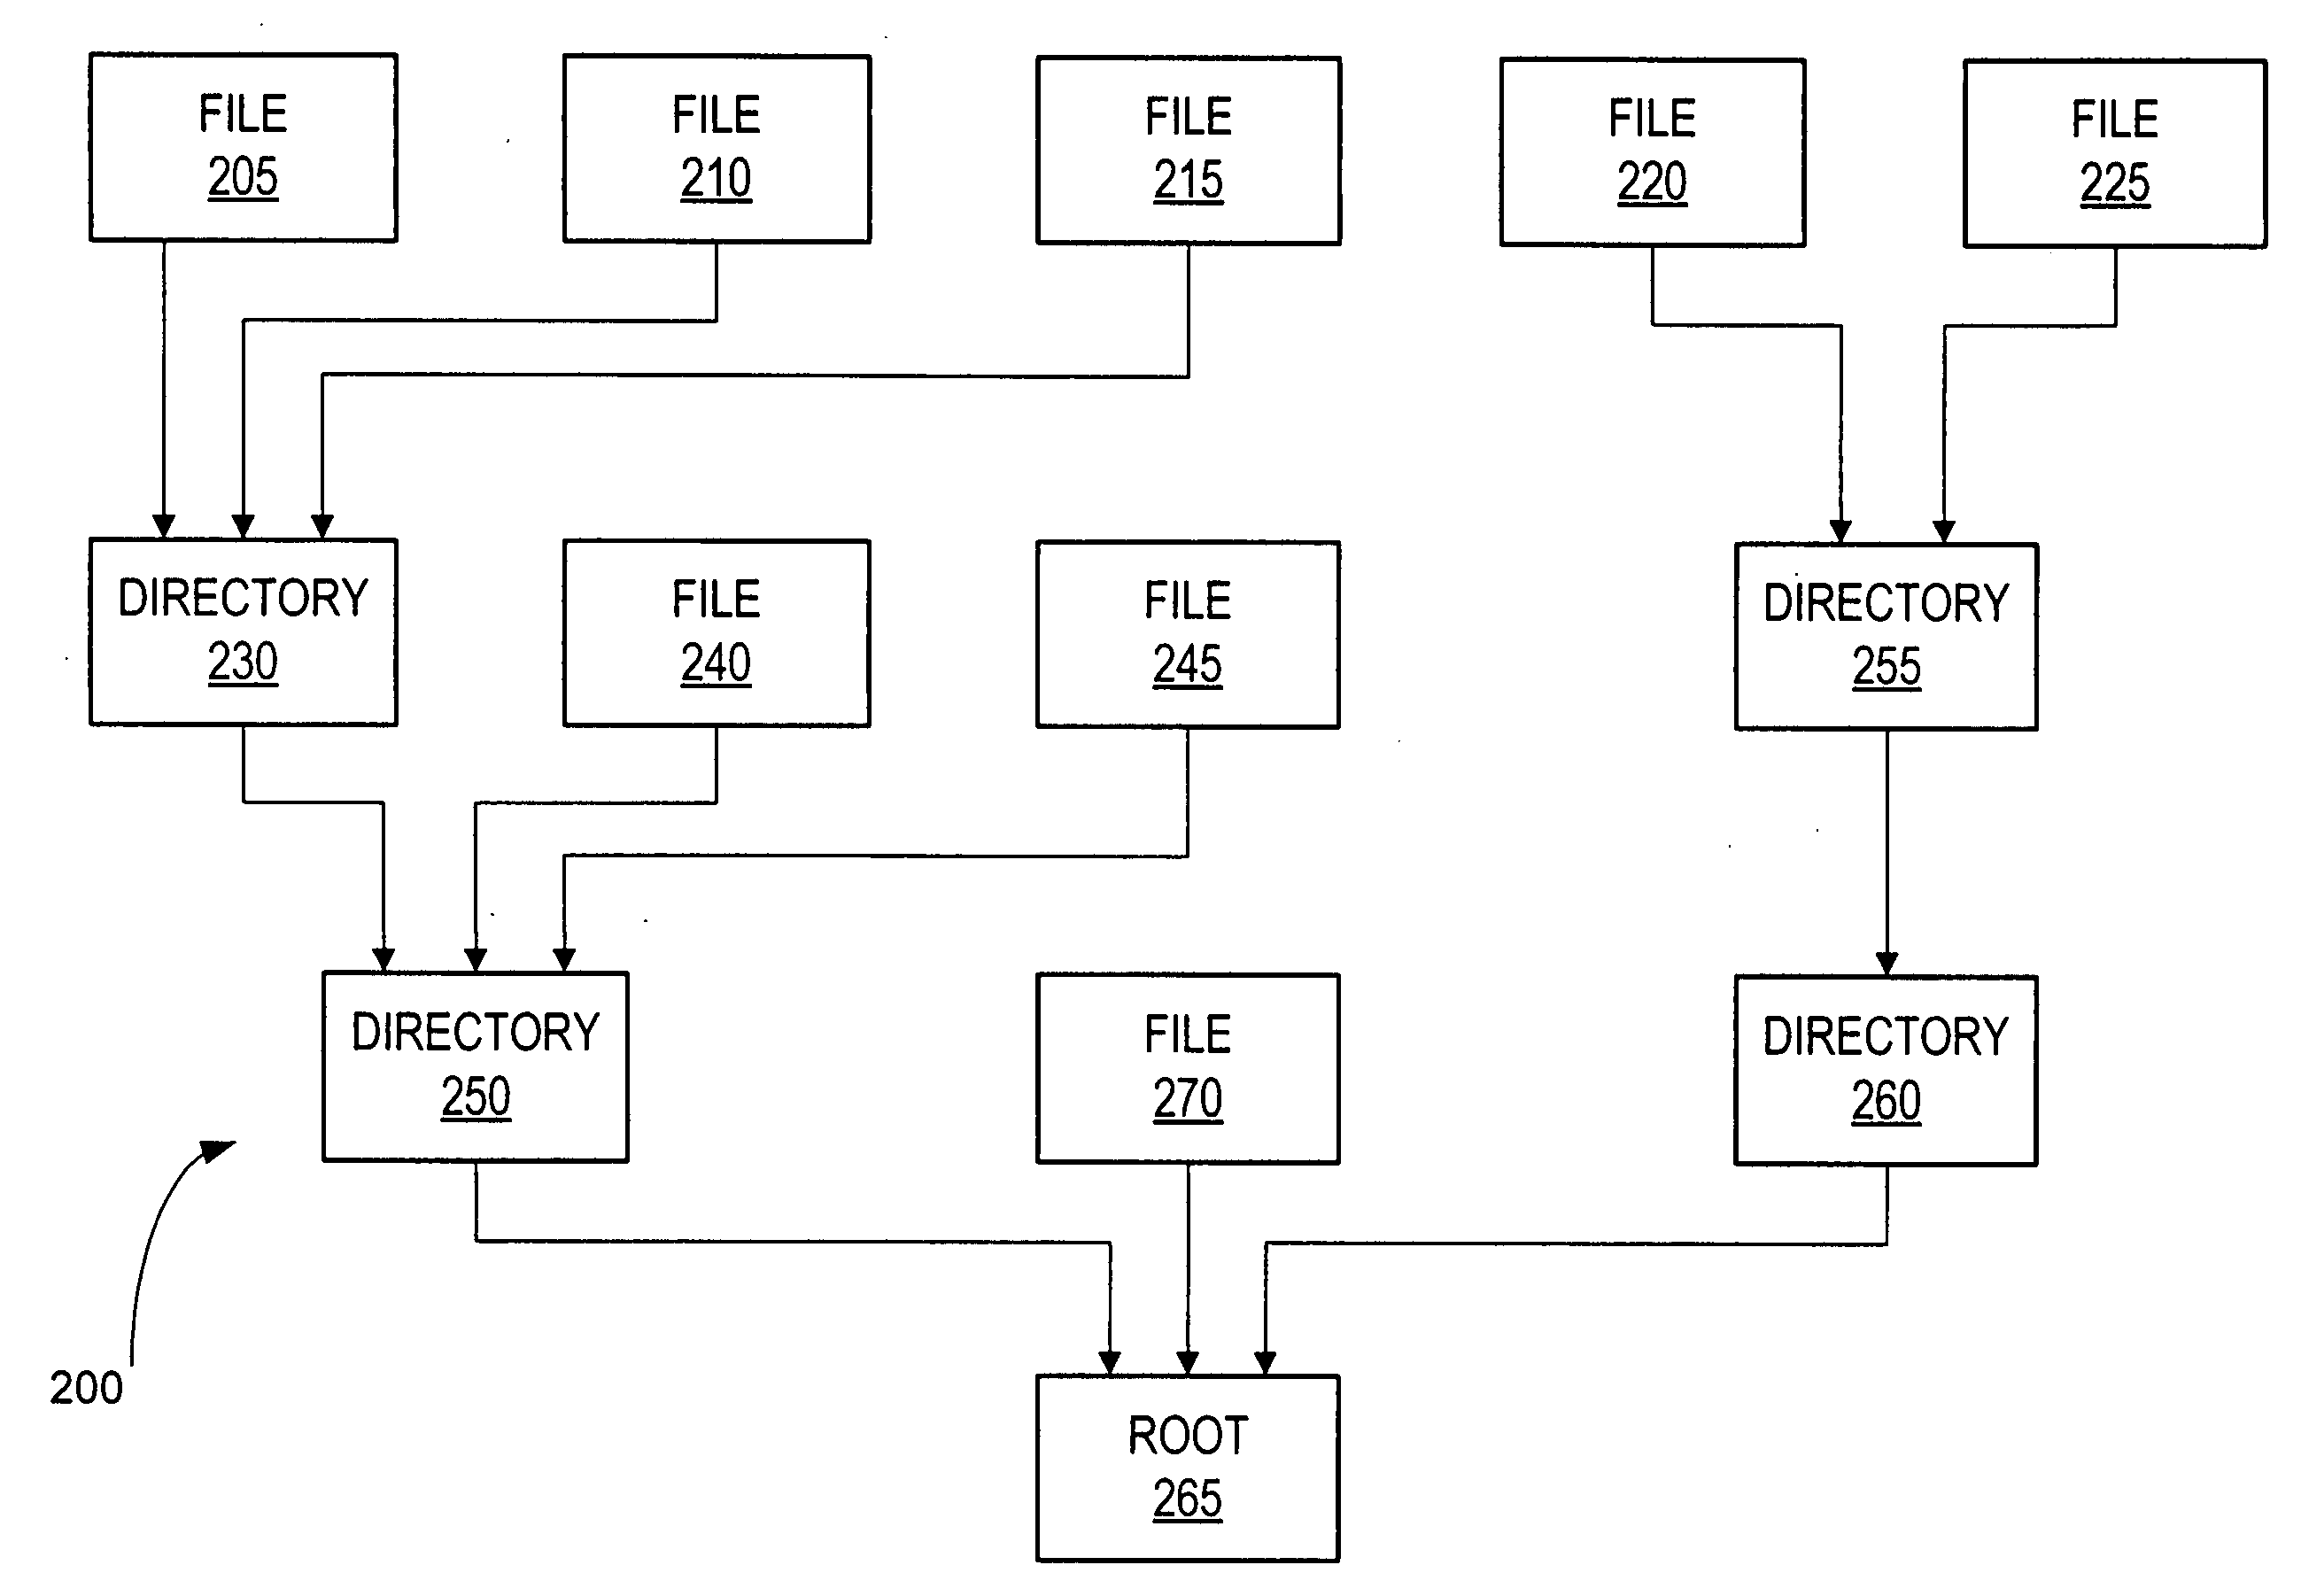 File system having transaction record coalescing